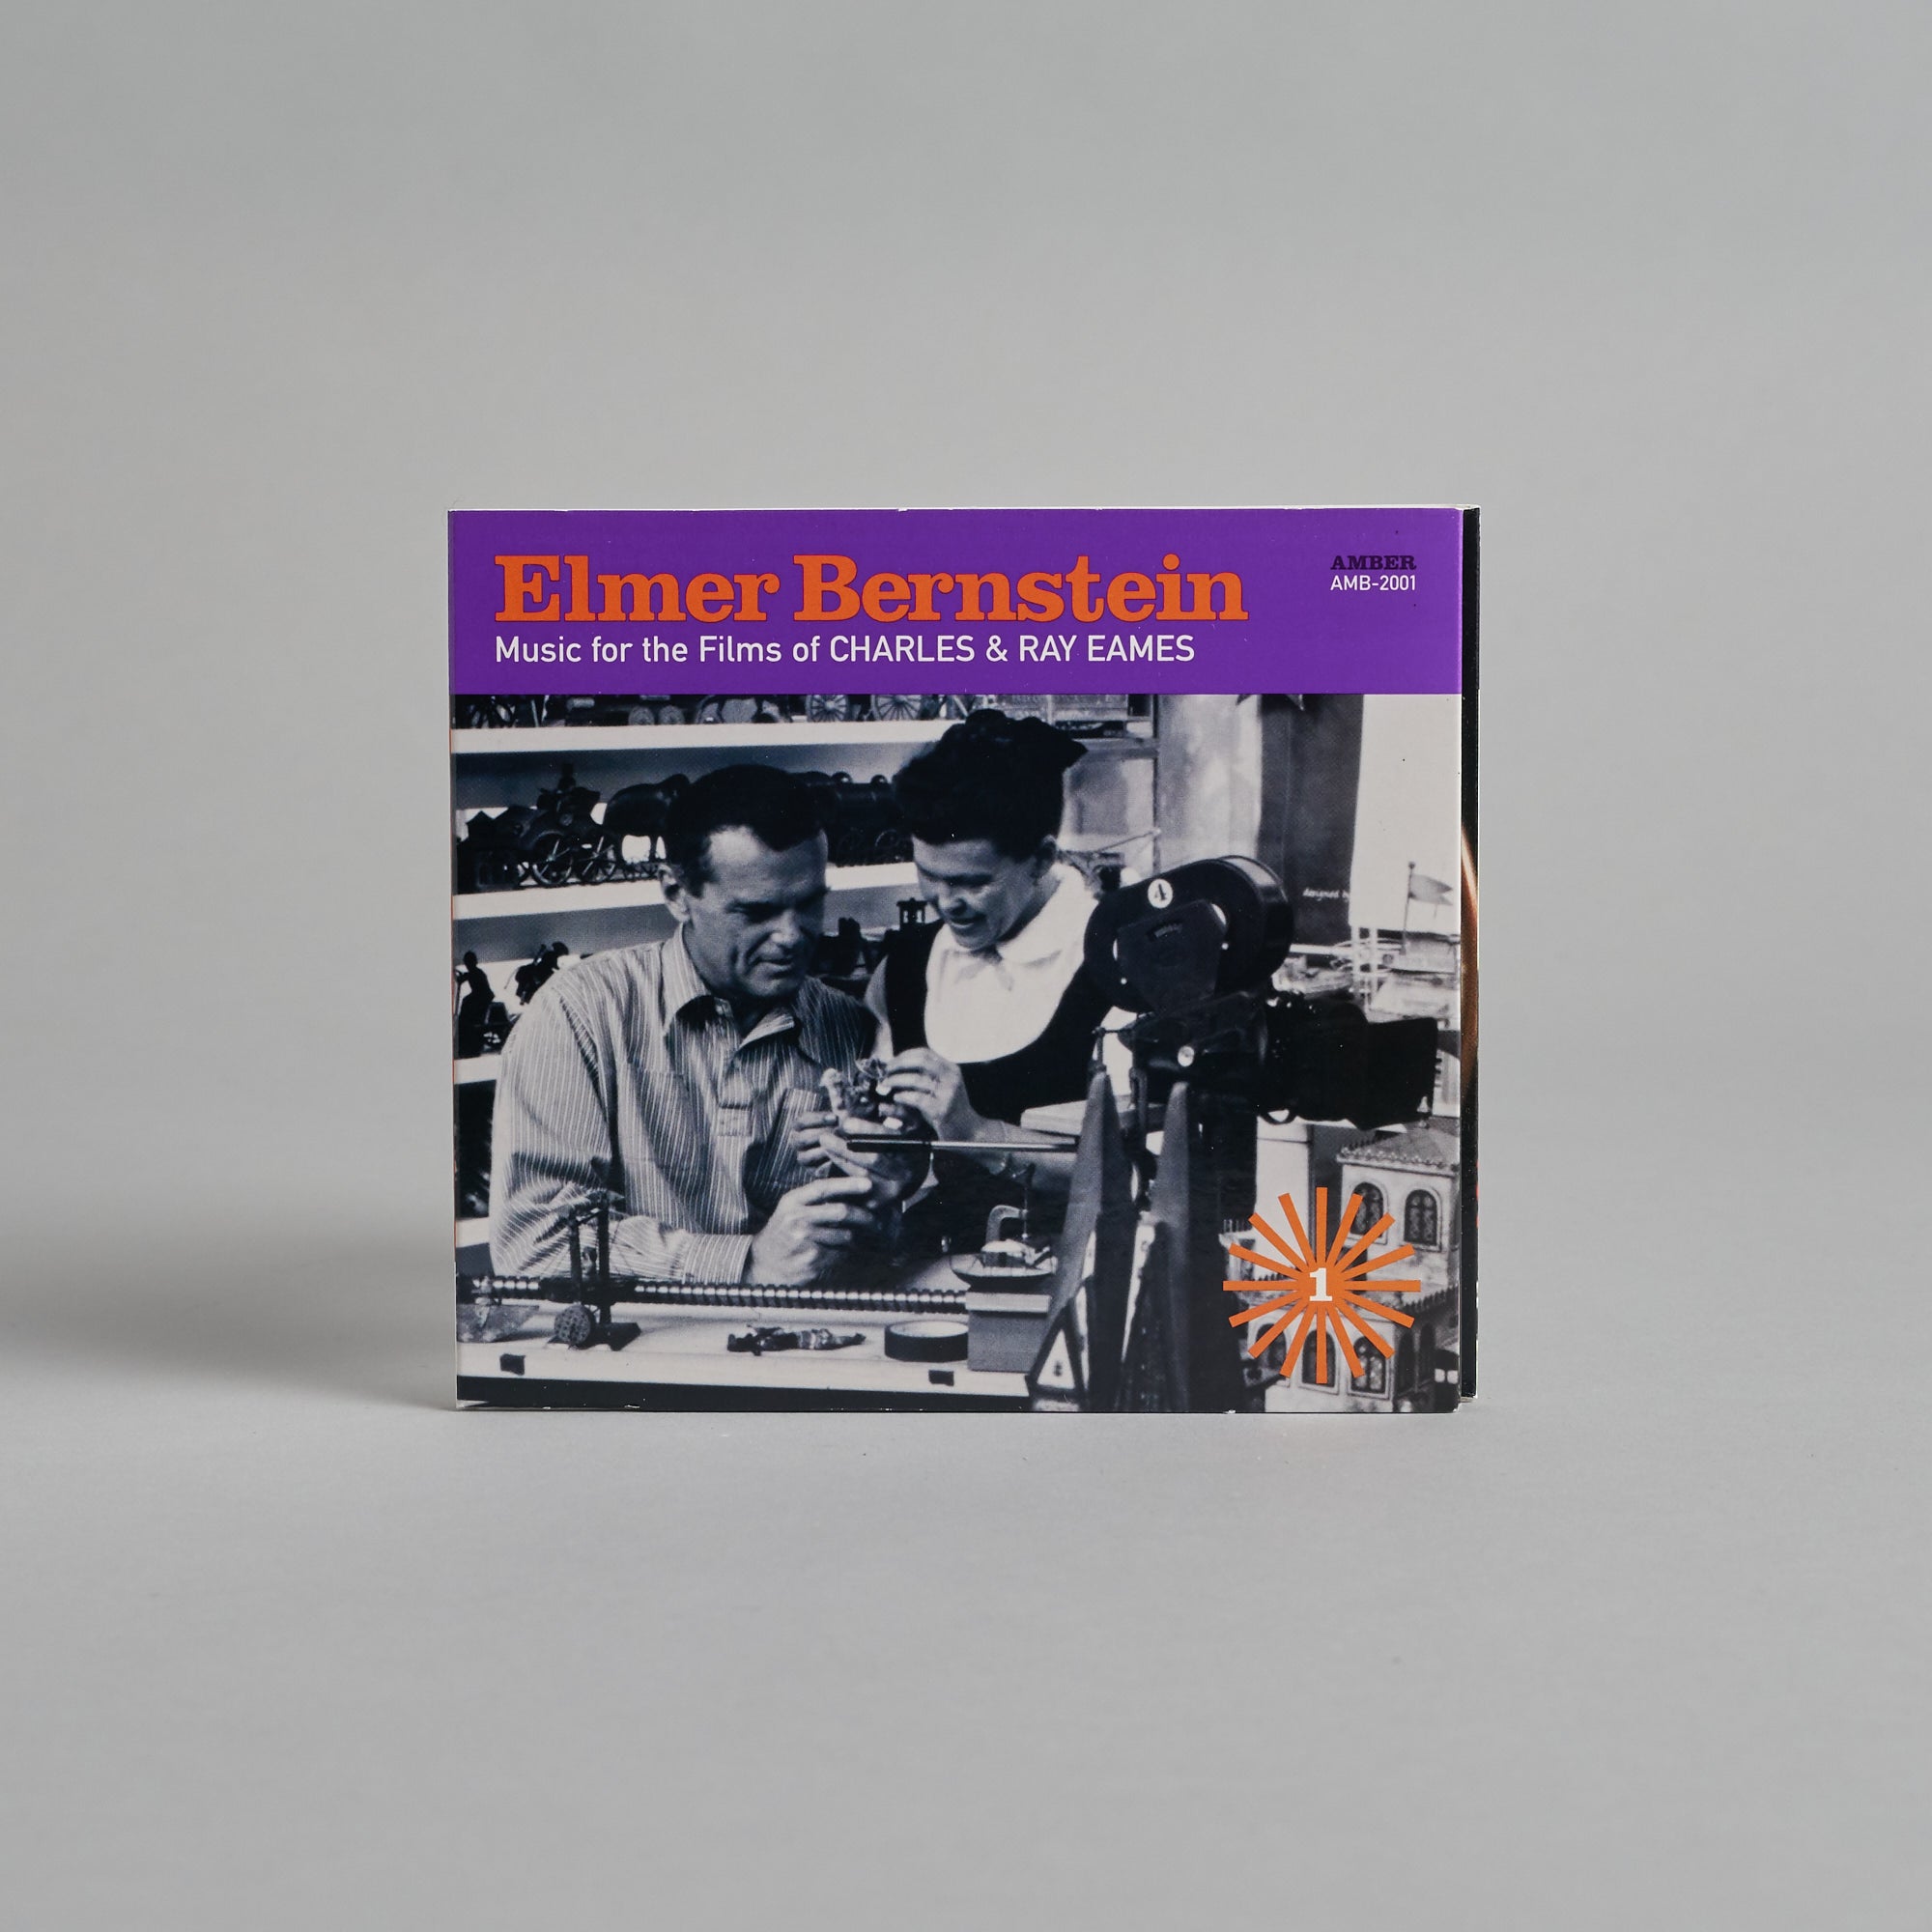 Elmer Bernstein: Music for the Films of Charles & Ray Eames CD Vol. 1